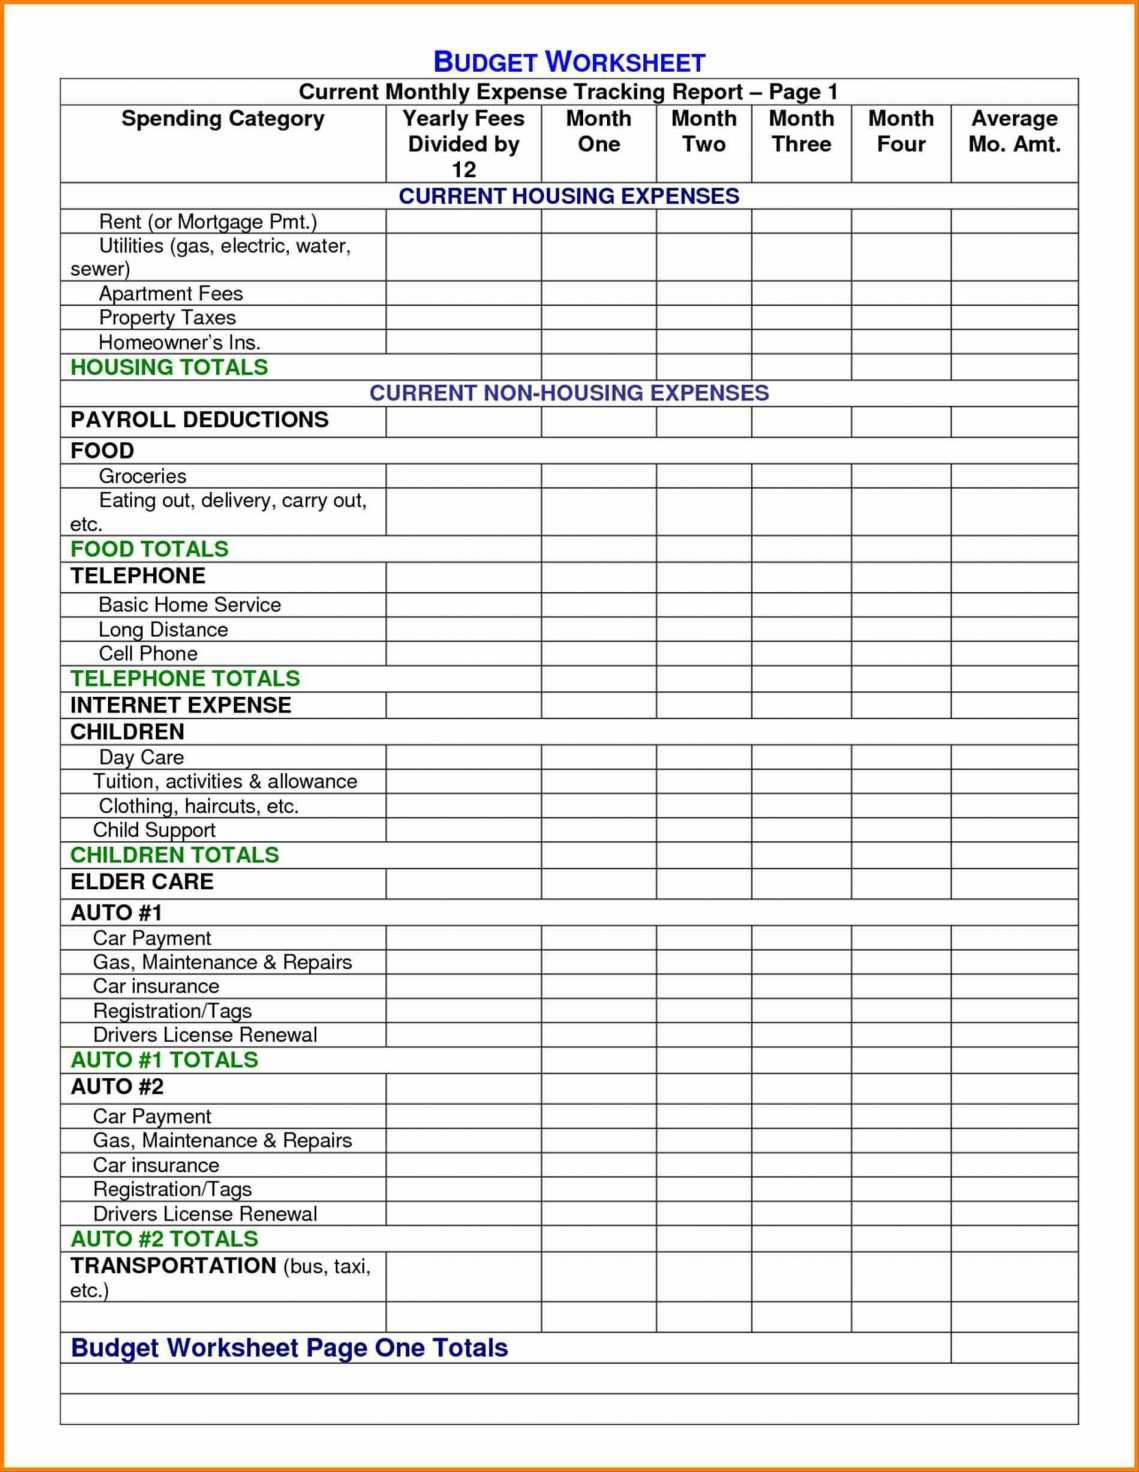 Bookkeeping For Self Employed Spreadsheet Spreadsheete For Small Throughout Bookkeeping For Self Employed Spreadsheet